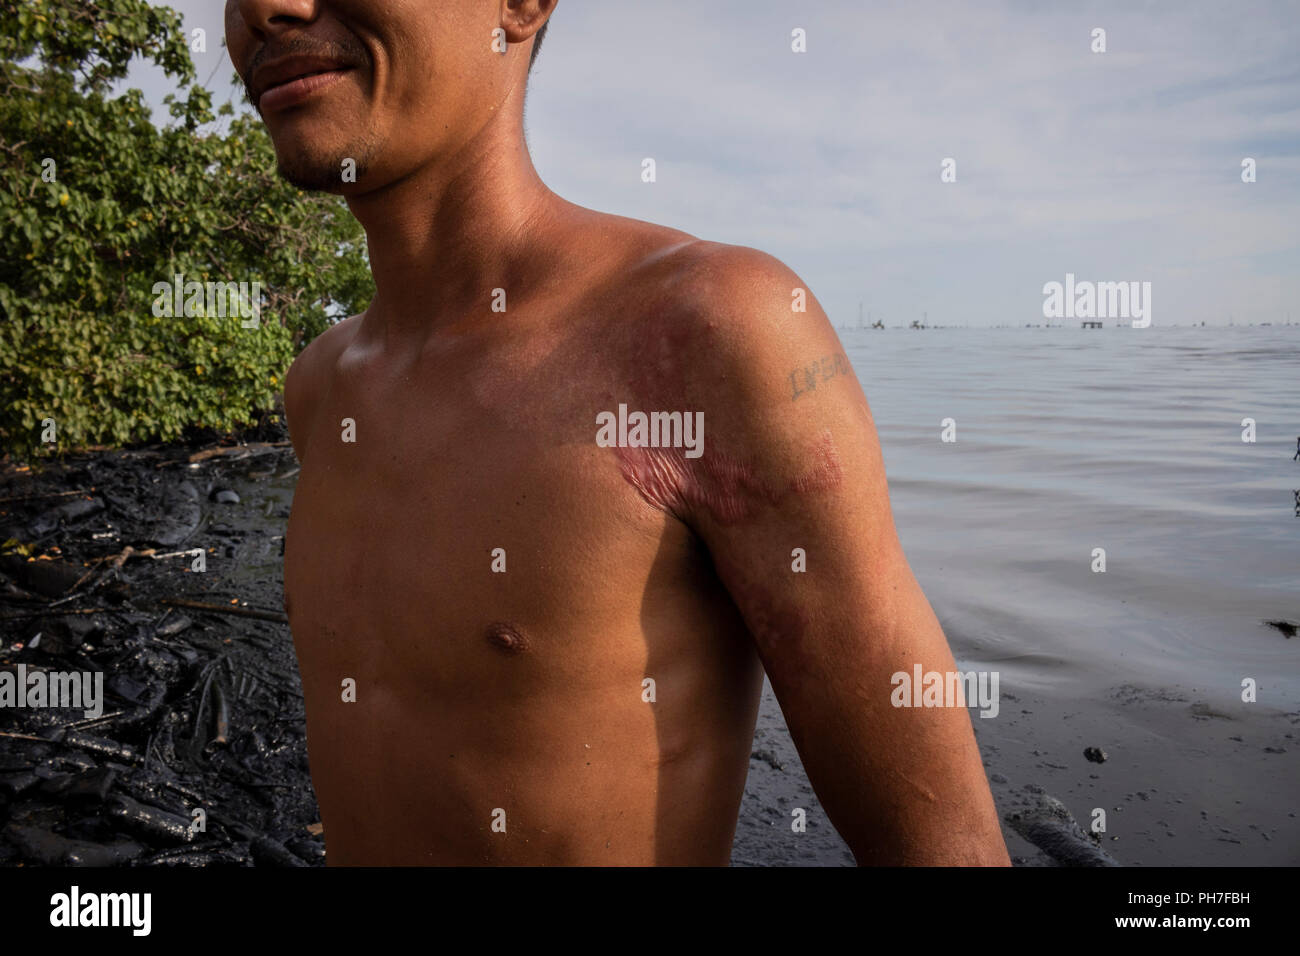 17 August 2018, Venezuela, Maracaibo: A man stands on the shore of Lake Maracaibo, polluted with oil, showing scars on his skin. He works as a fisherman. Parts of his body have been exposed to oil for long periods of time. It is said to have inflicted his wounds. Underneath the lake are large deposits from which the state-owned Venezuelan company PDVSA produces oil and gas. Oil pipelines are already leaking there. However, the pollution of the lake seems to have become chronic. There are hardly any official figures on this, given the situation, which is strictly controlled by the national regi Stock Photo